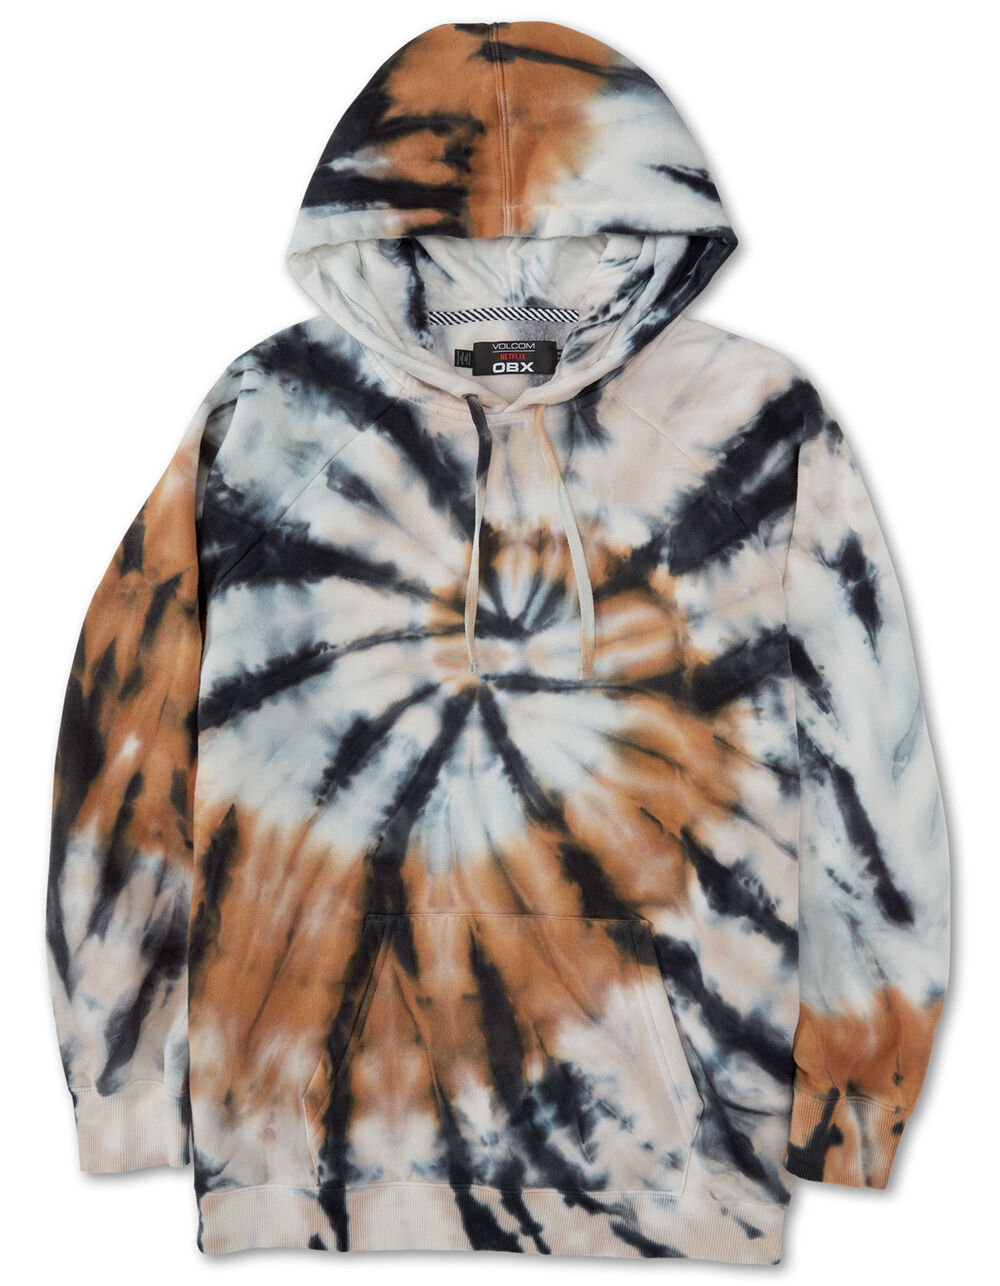 VOLCOM x Outer Banks Kiara Pullover Hoodie - BROWN COMBO | Tillys